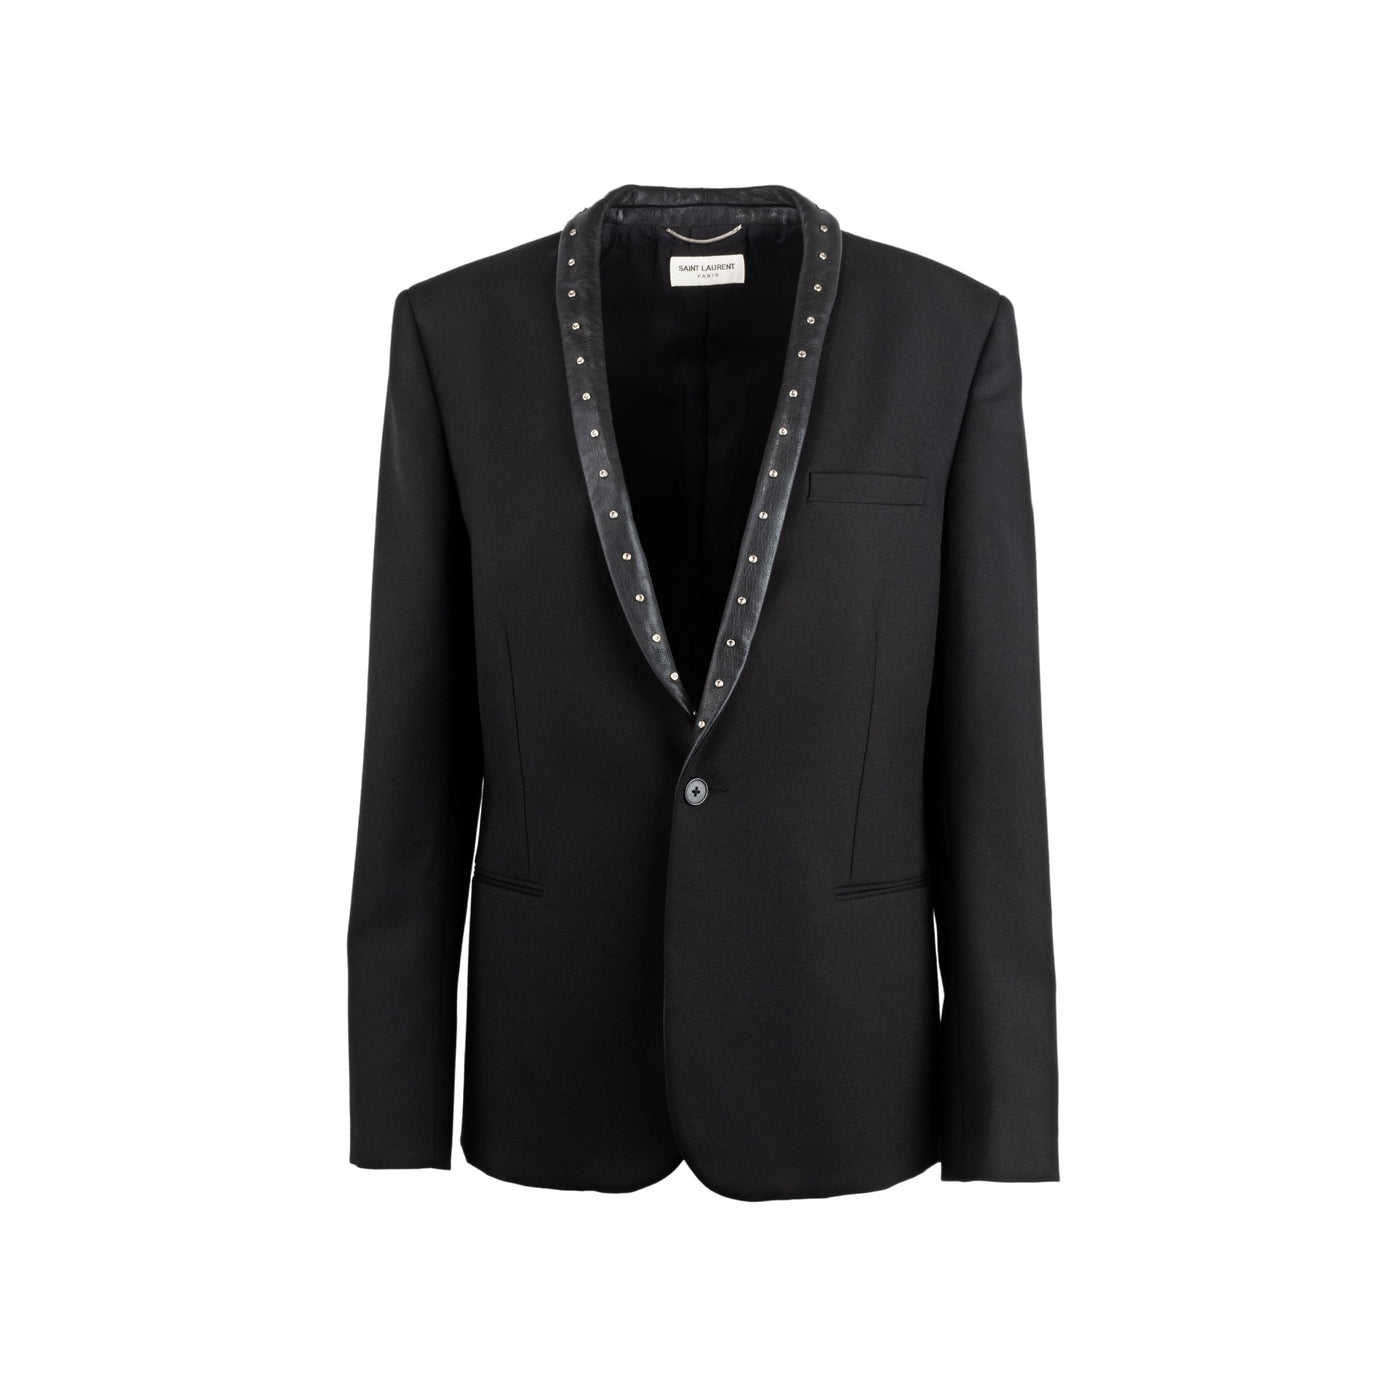 Yves Saint Laurent black wool blazer jacket. Featuring leather lapels, decorated with studs, long sleeves, a single button fastening, front pockets and a back vent pre-owned